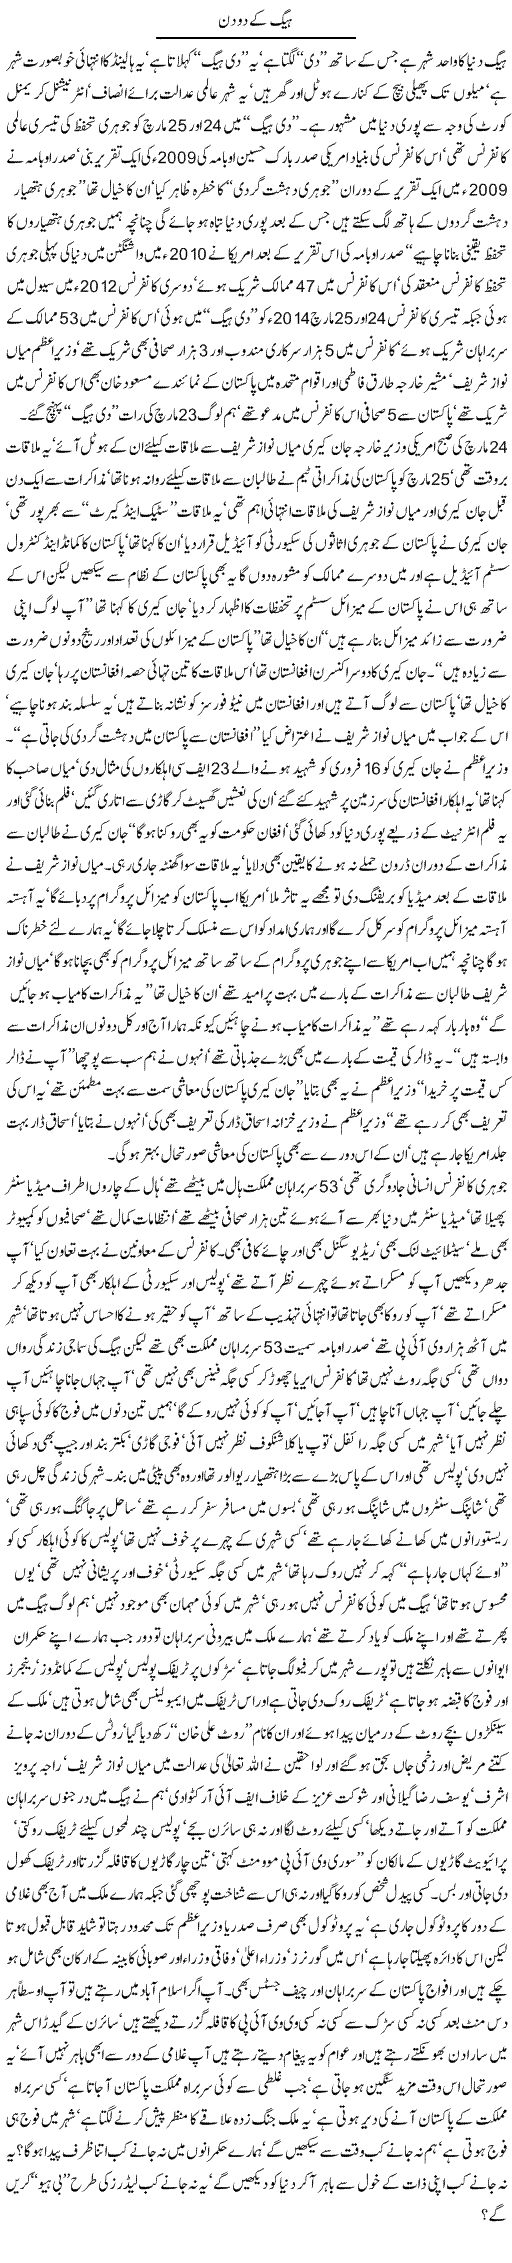 Hague k do din - Javed Chaudhry